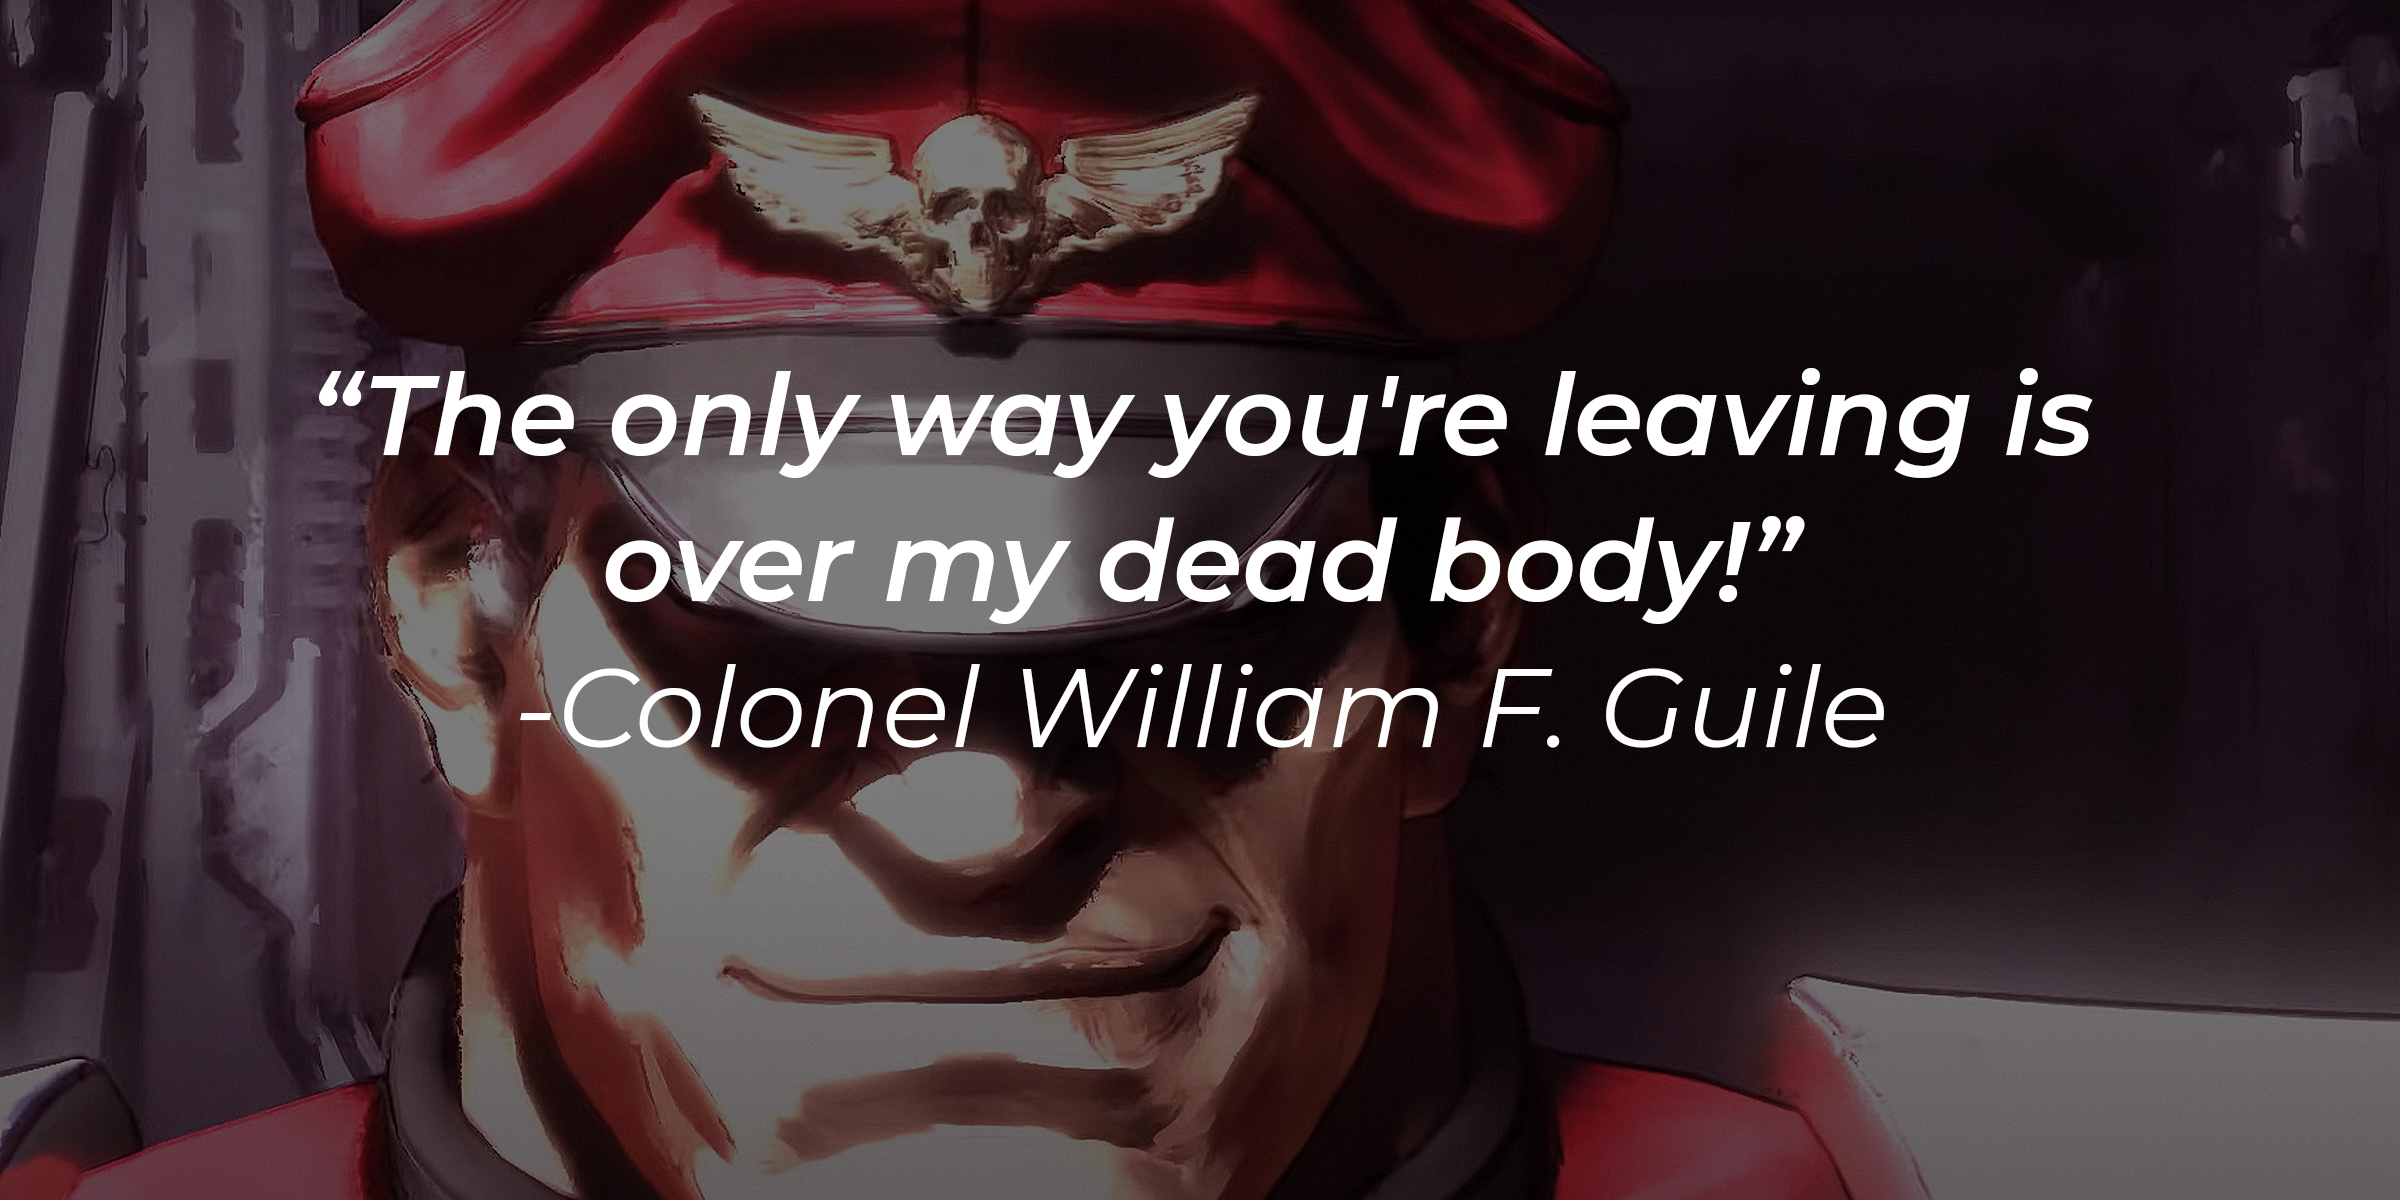 An image of Colonel William F. Guile with the quote, "The only way you're leaving is over my dead body!"